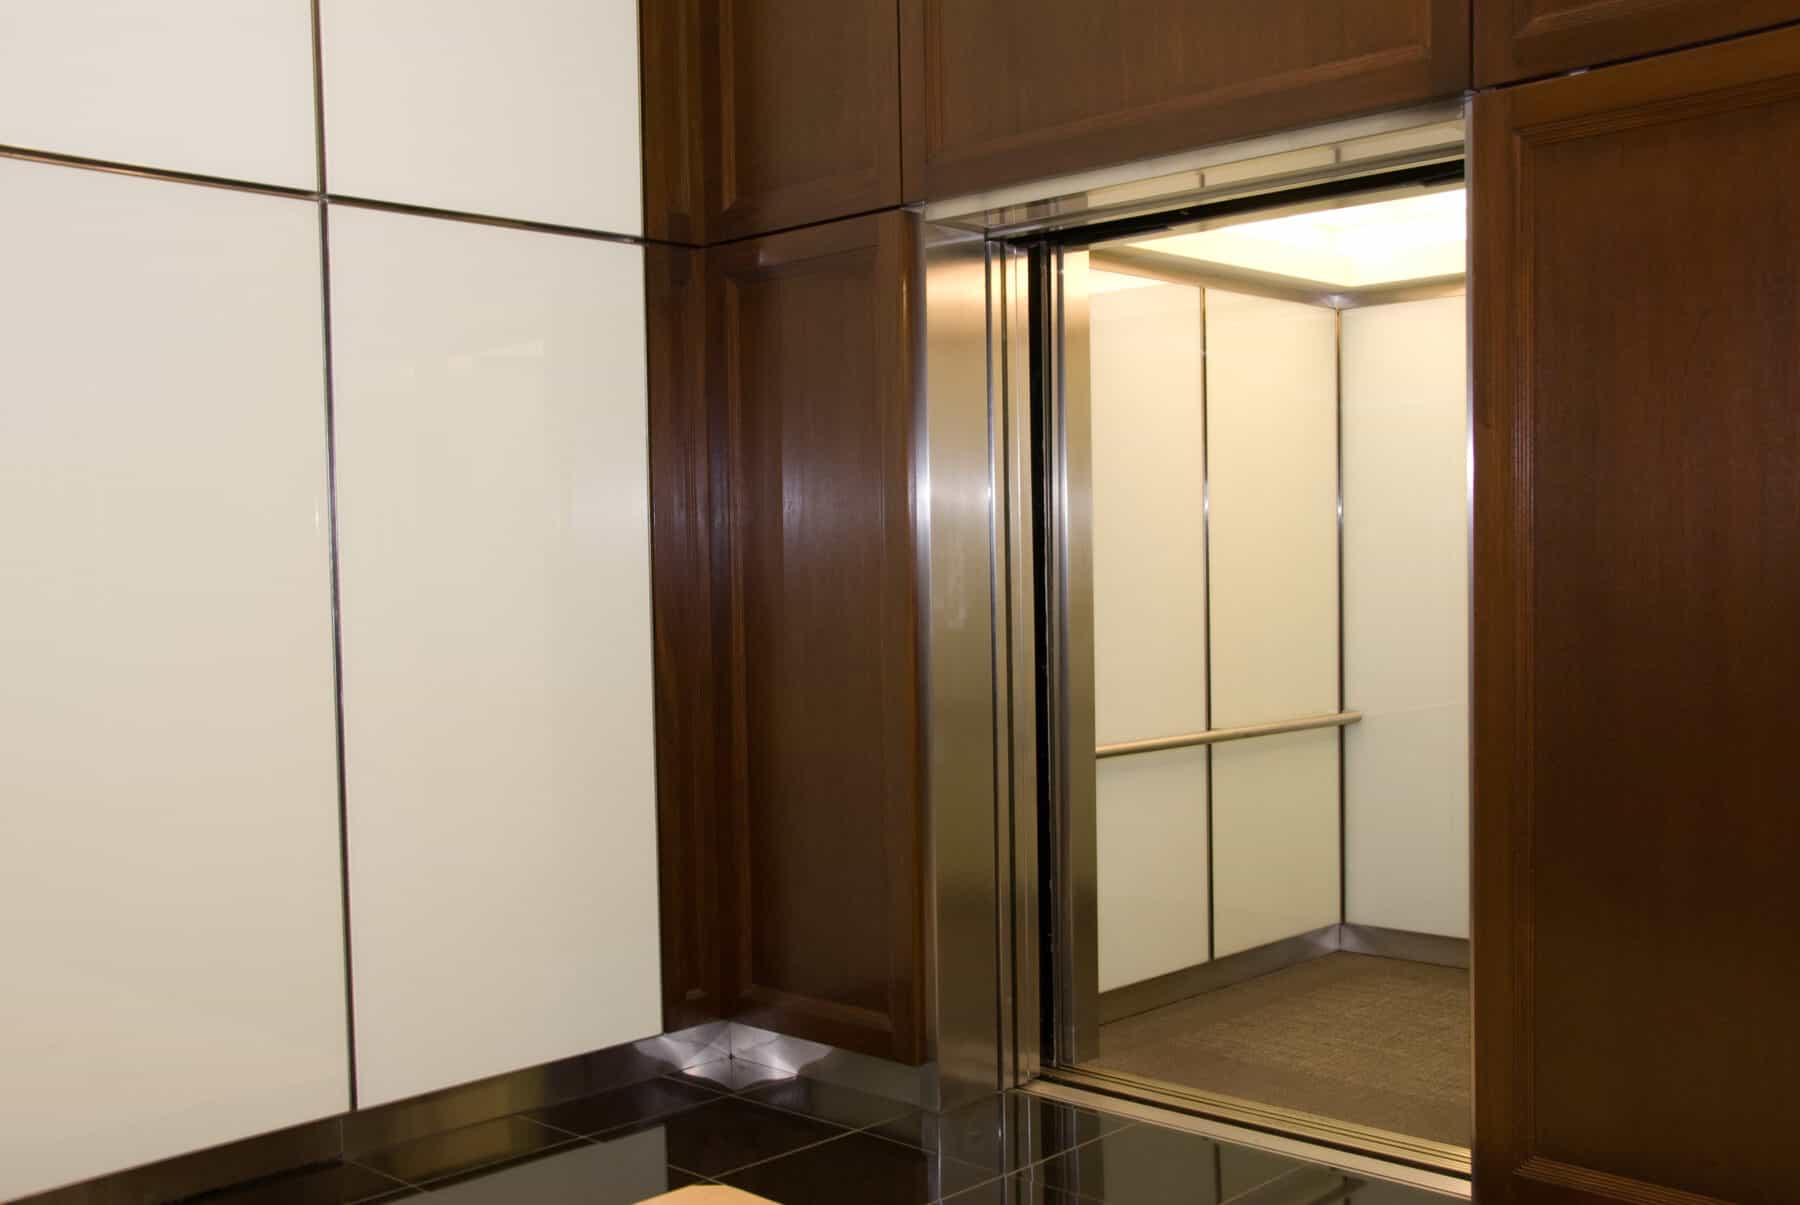 Custom Fabrication of Architectural Back Painted Glass Wall Panels for Elevators and Lobby from Construction Specialty Projects by Commercial Builder & General Contractor Structural Enterprises